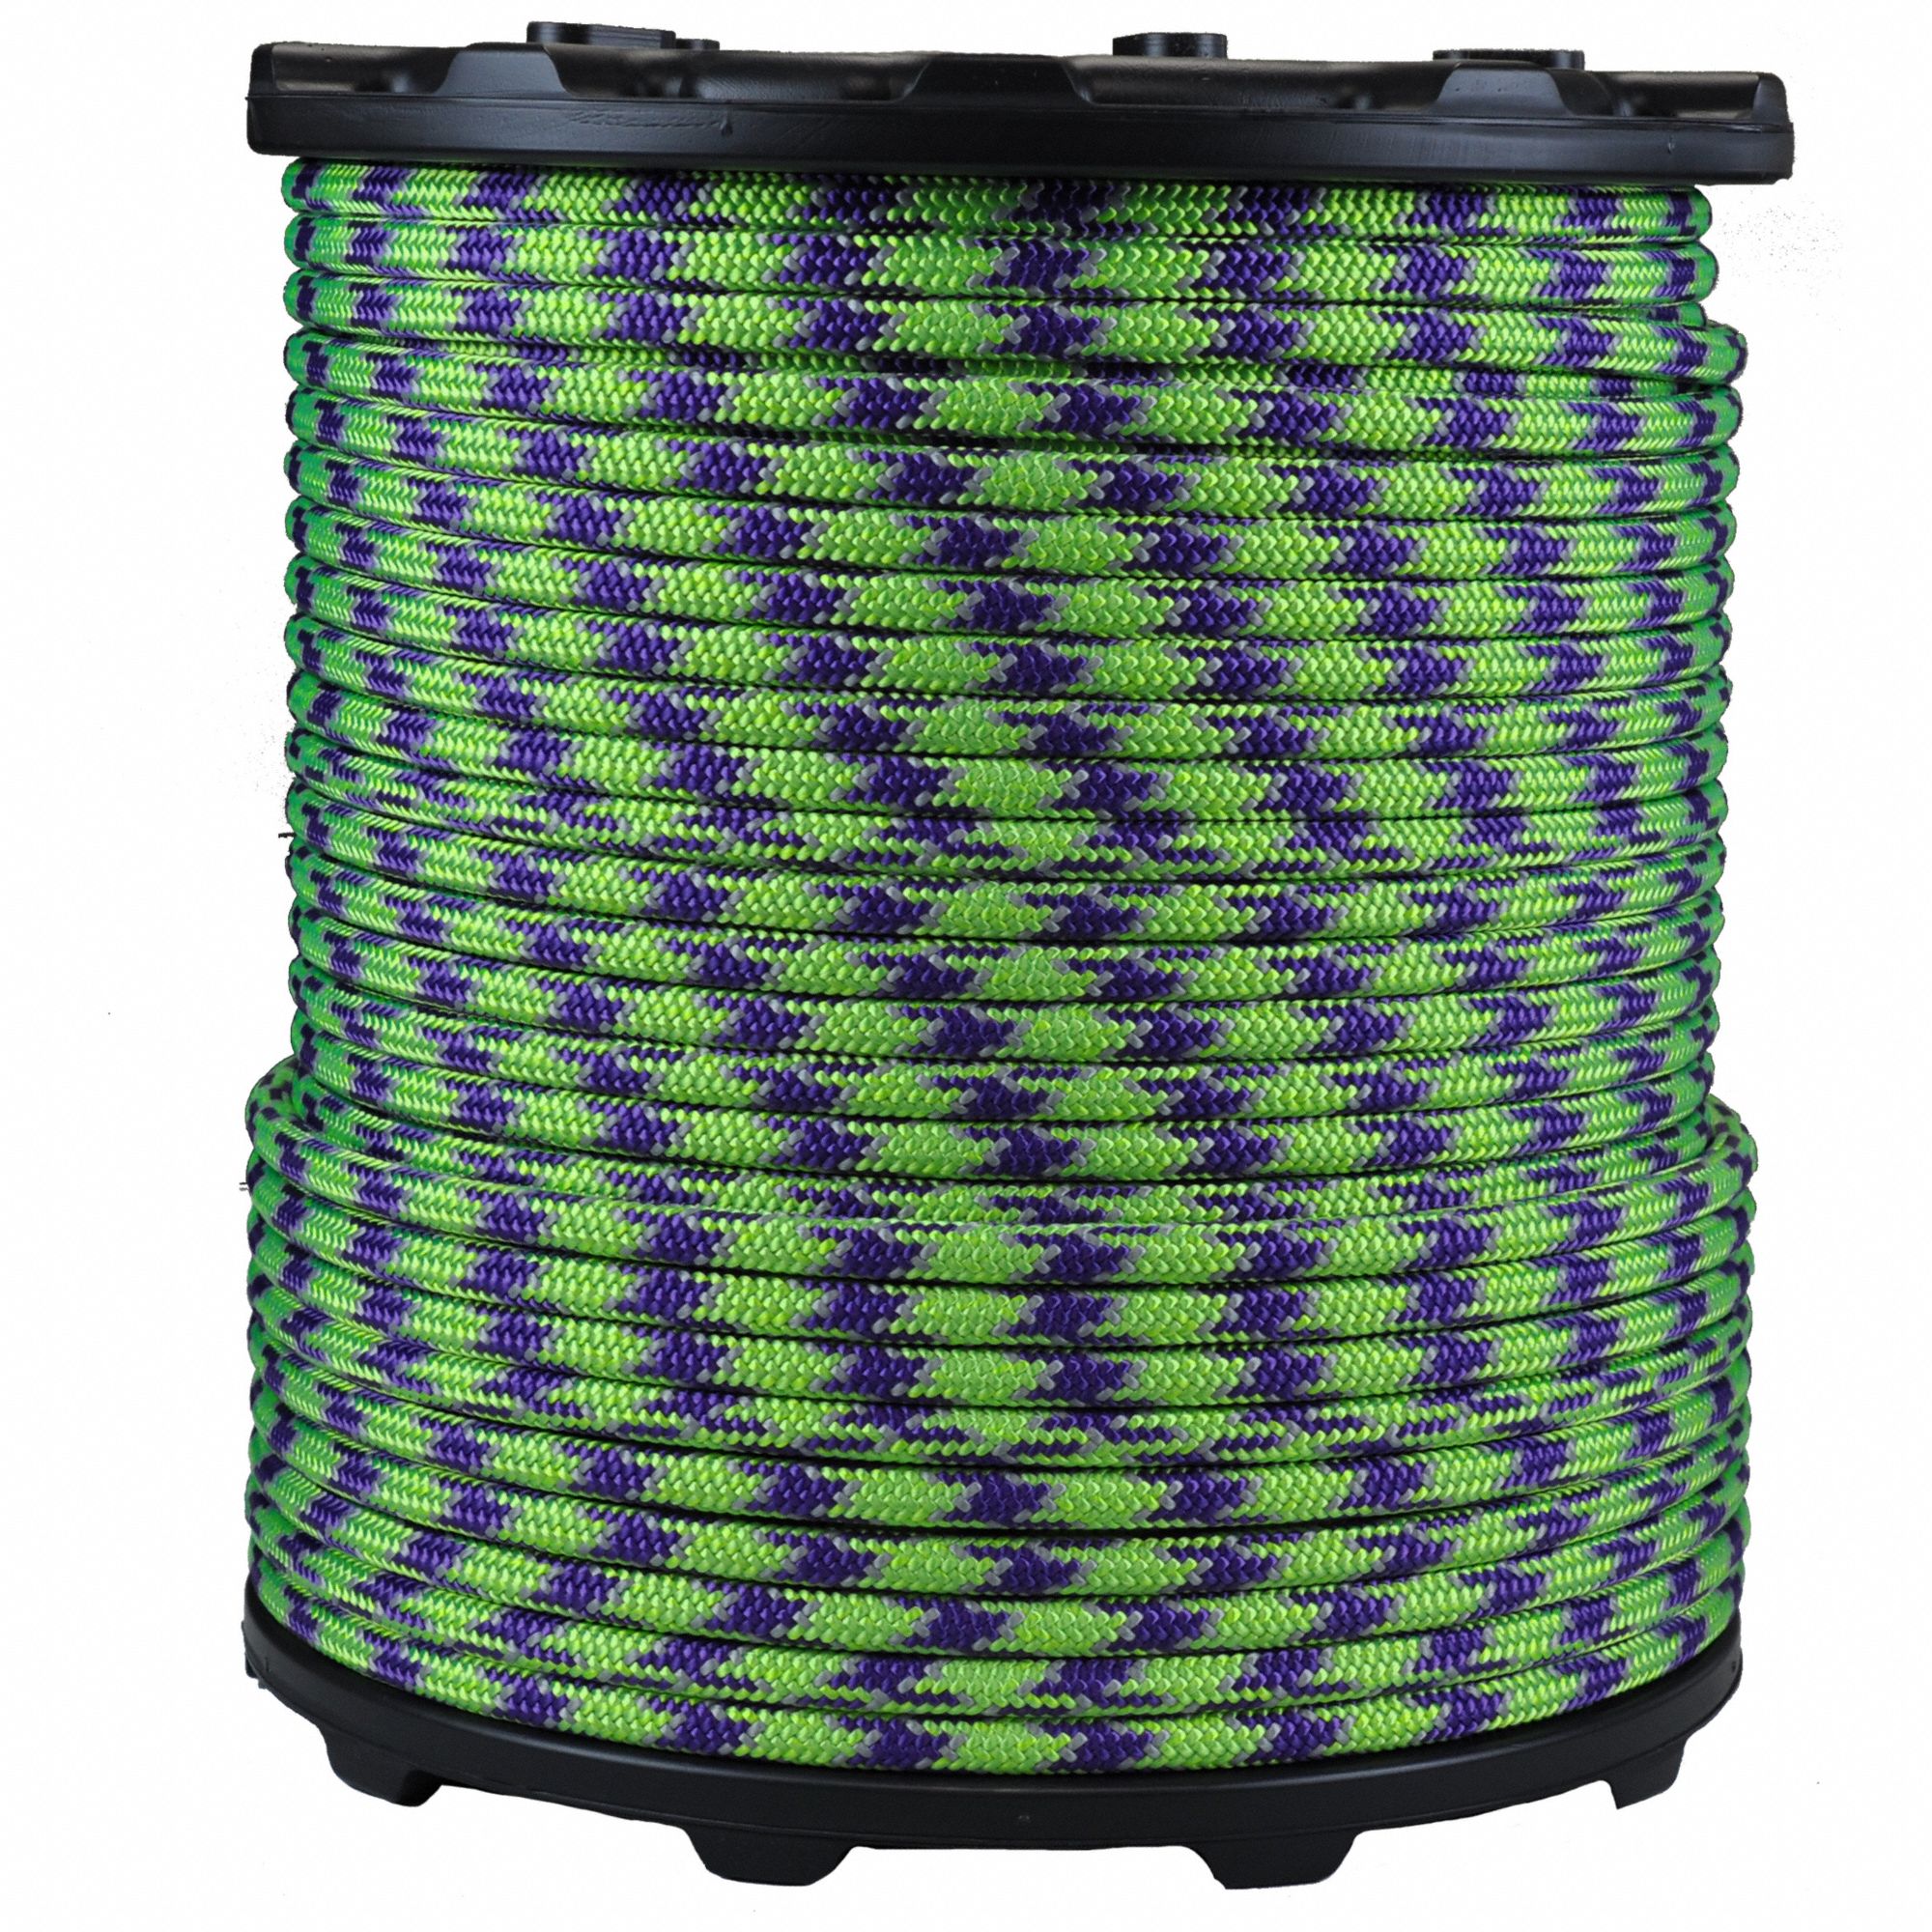 Climbing Rope: 7/16 in Rope Dia, Green/Purple/Silver, 600 ft Rope Lg, 603 lb Working Load Limit